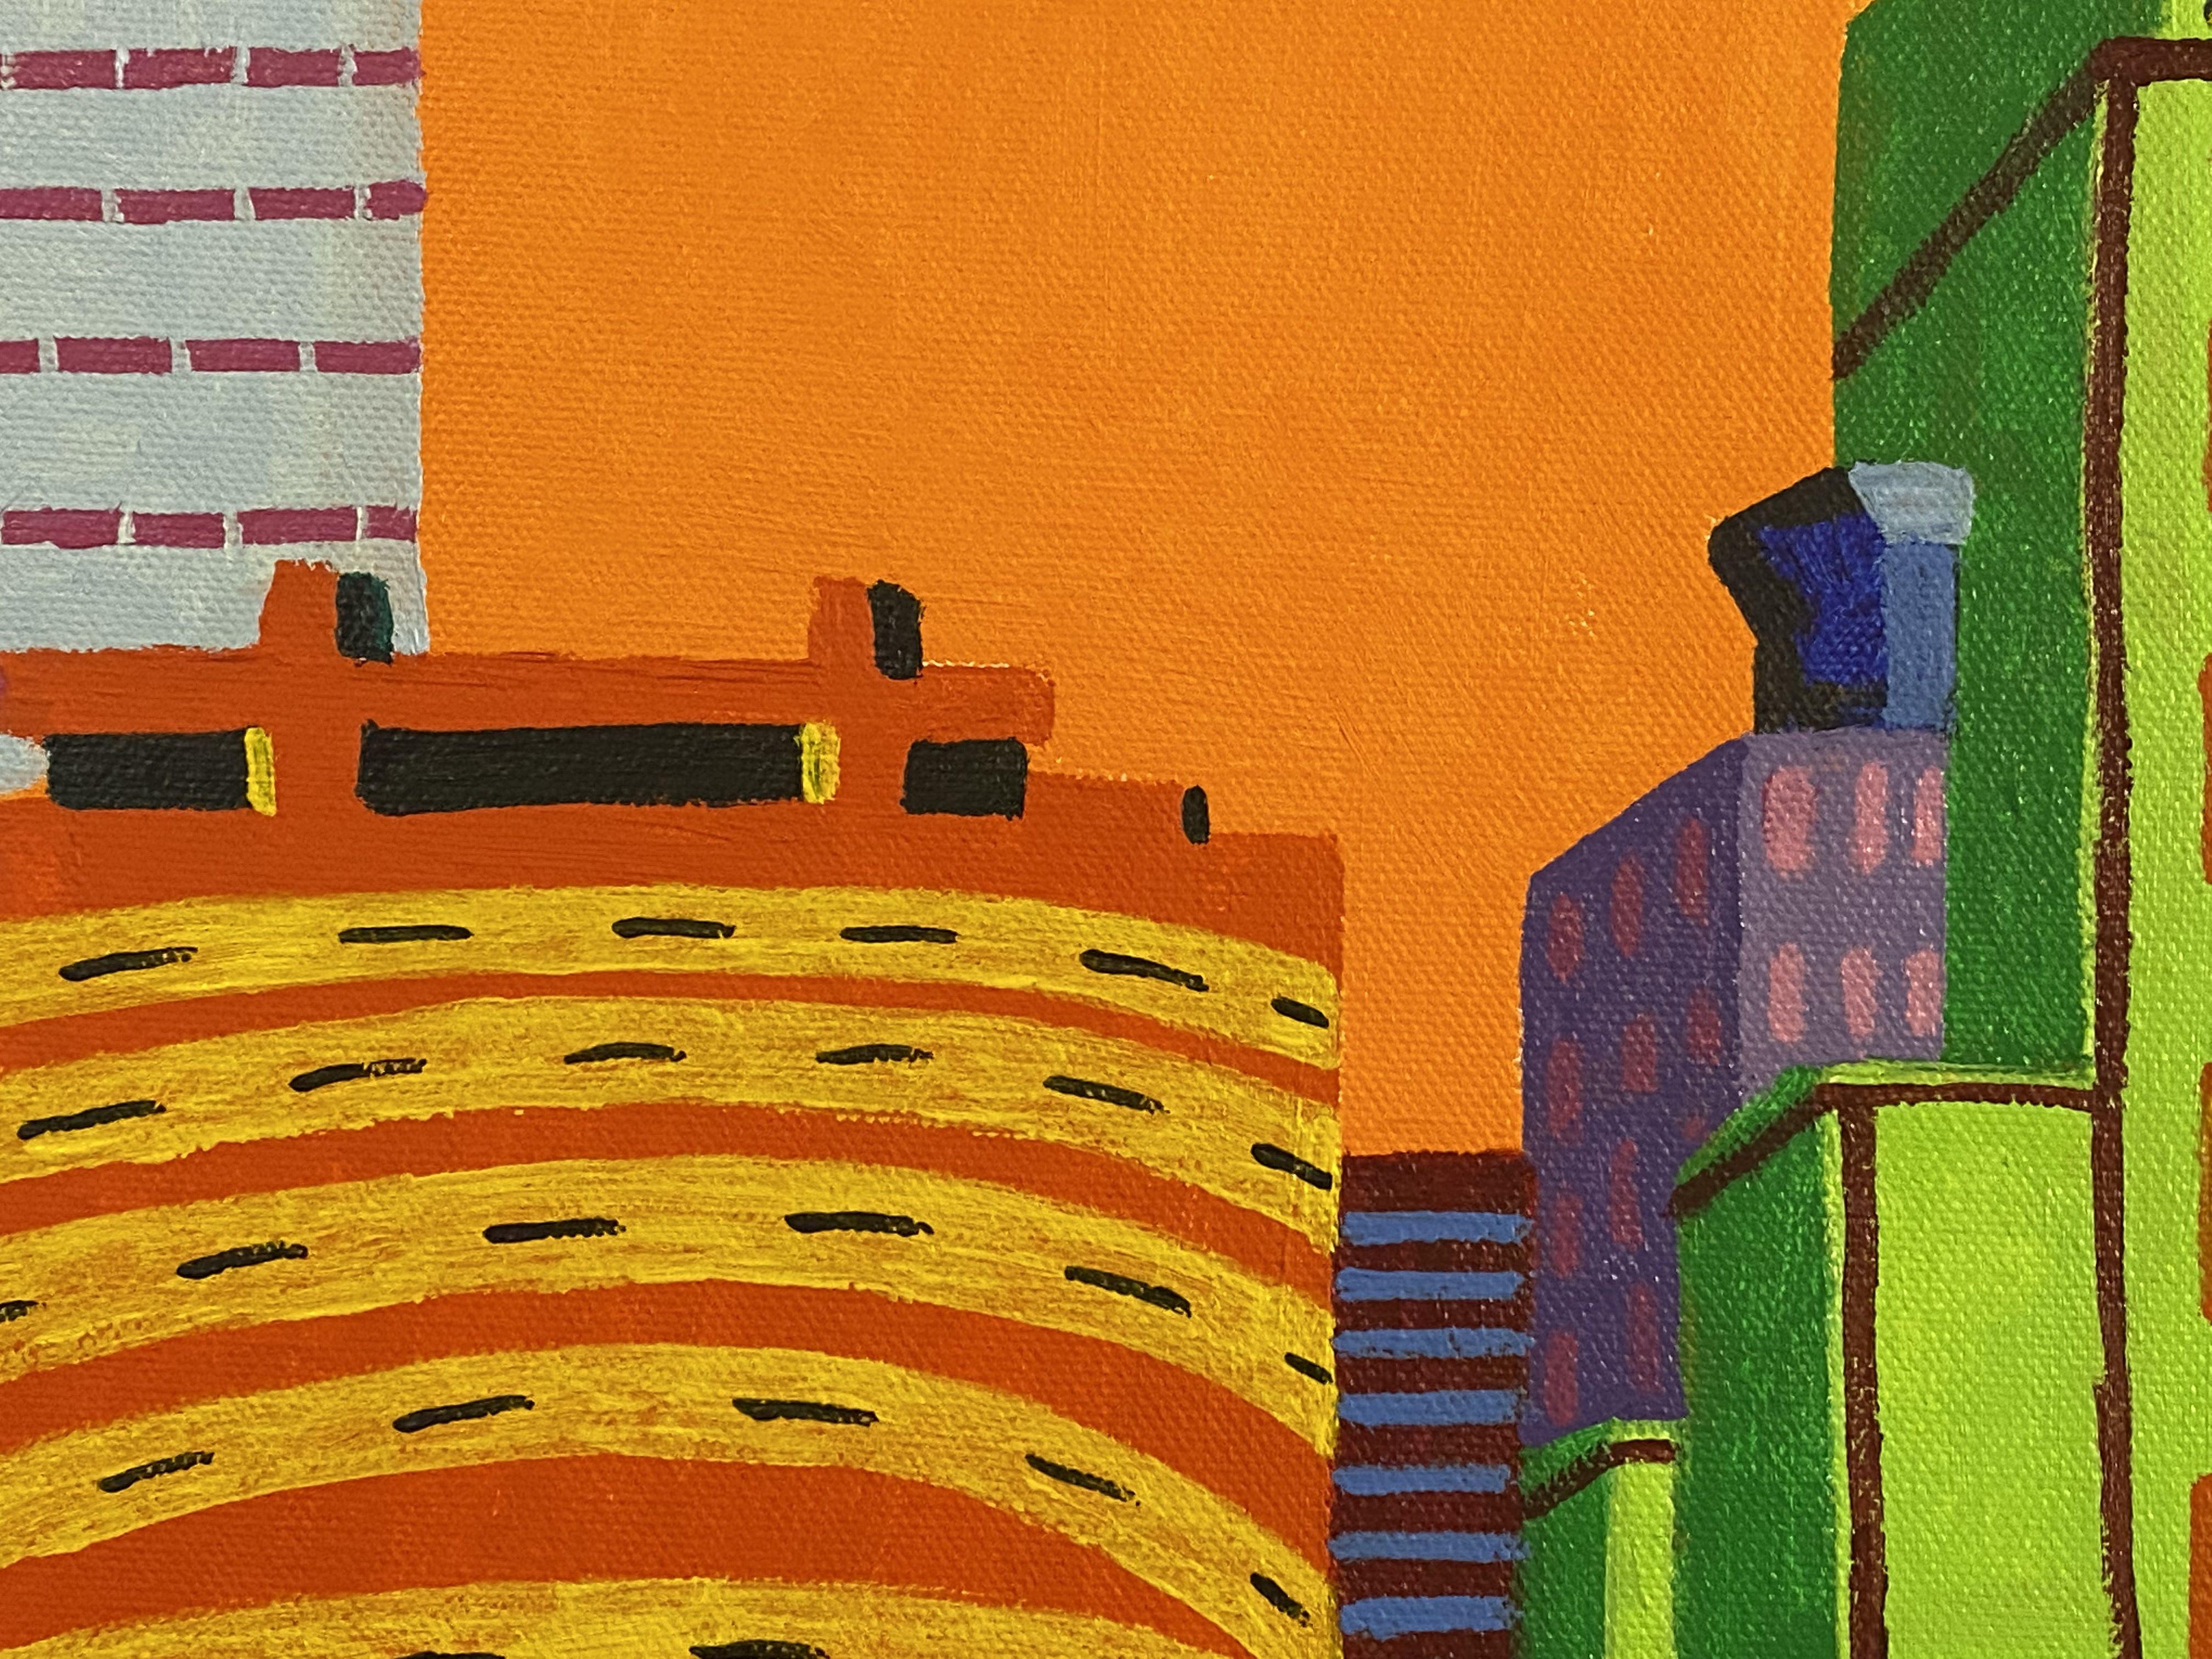 Inspired by the many towering skyscrapers during my many walks down the streets of New York City, I created this vibrant Pop Art painting so bright the colors dance on the canvas, maybe even brighter than a David Hockney. It's done in a Nouveau